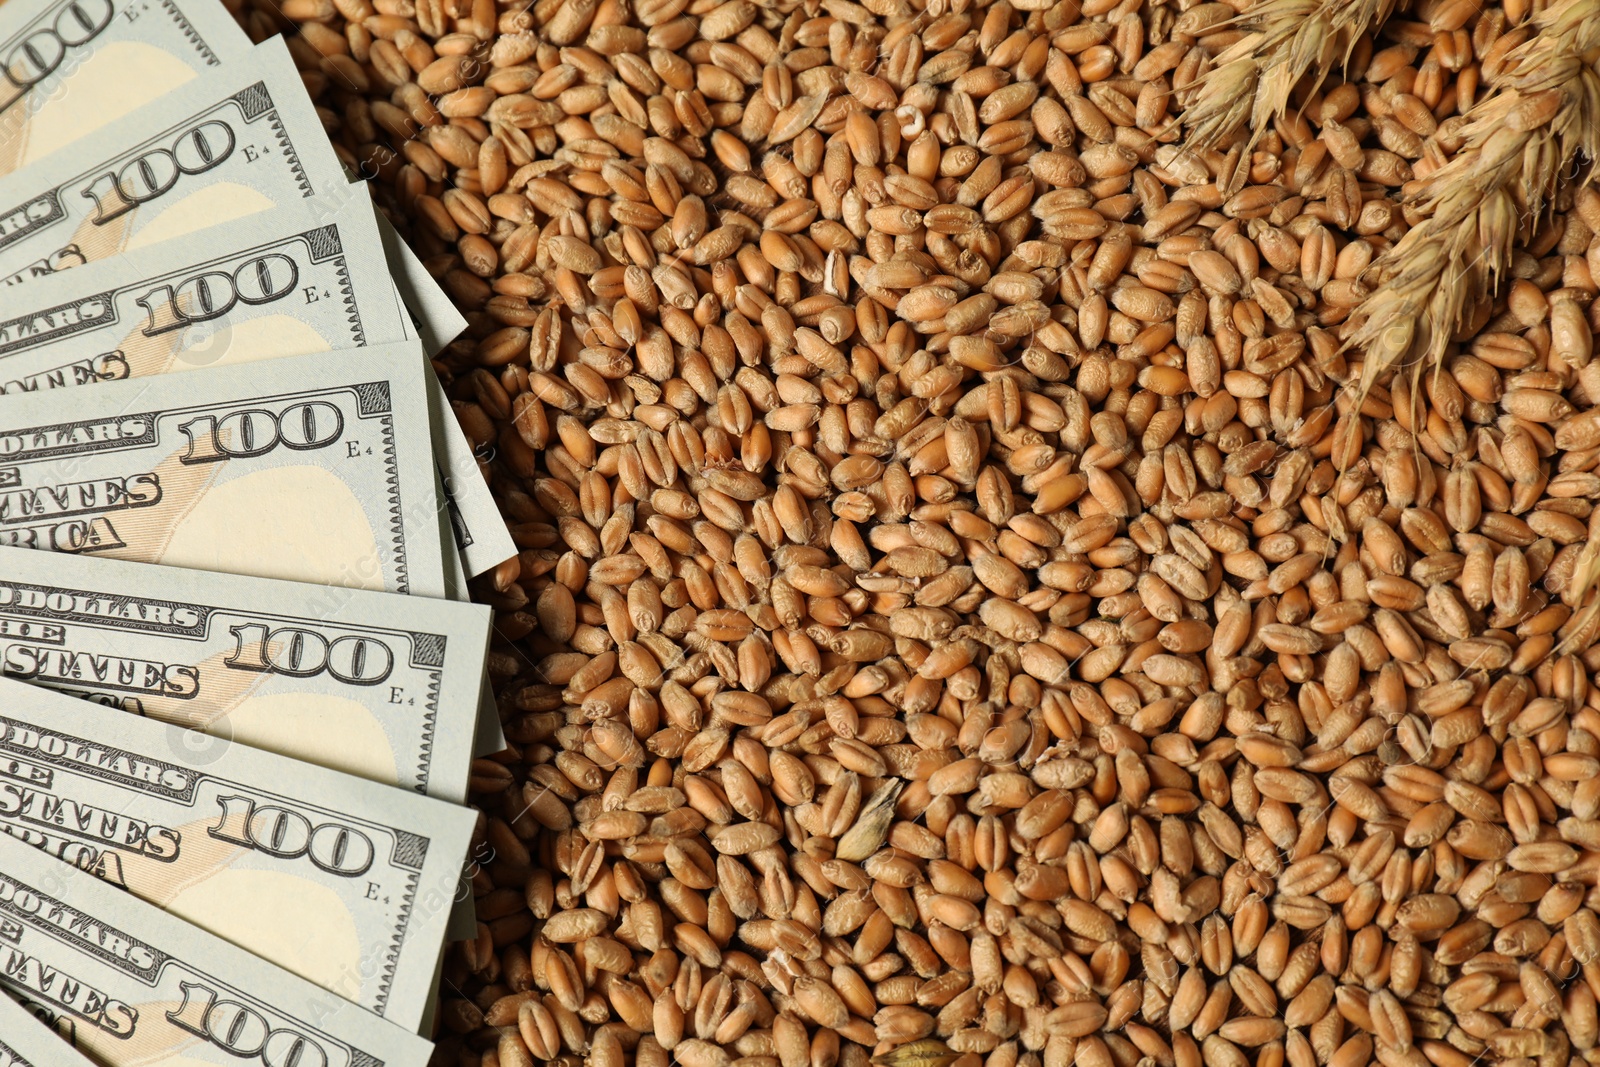 Photo of Dollar banknotes and wheat ears on grains, top view. Agricultural business